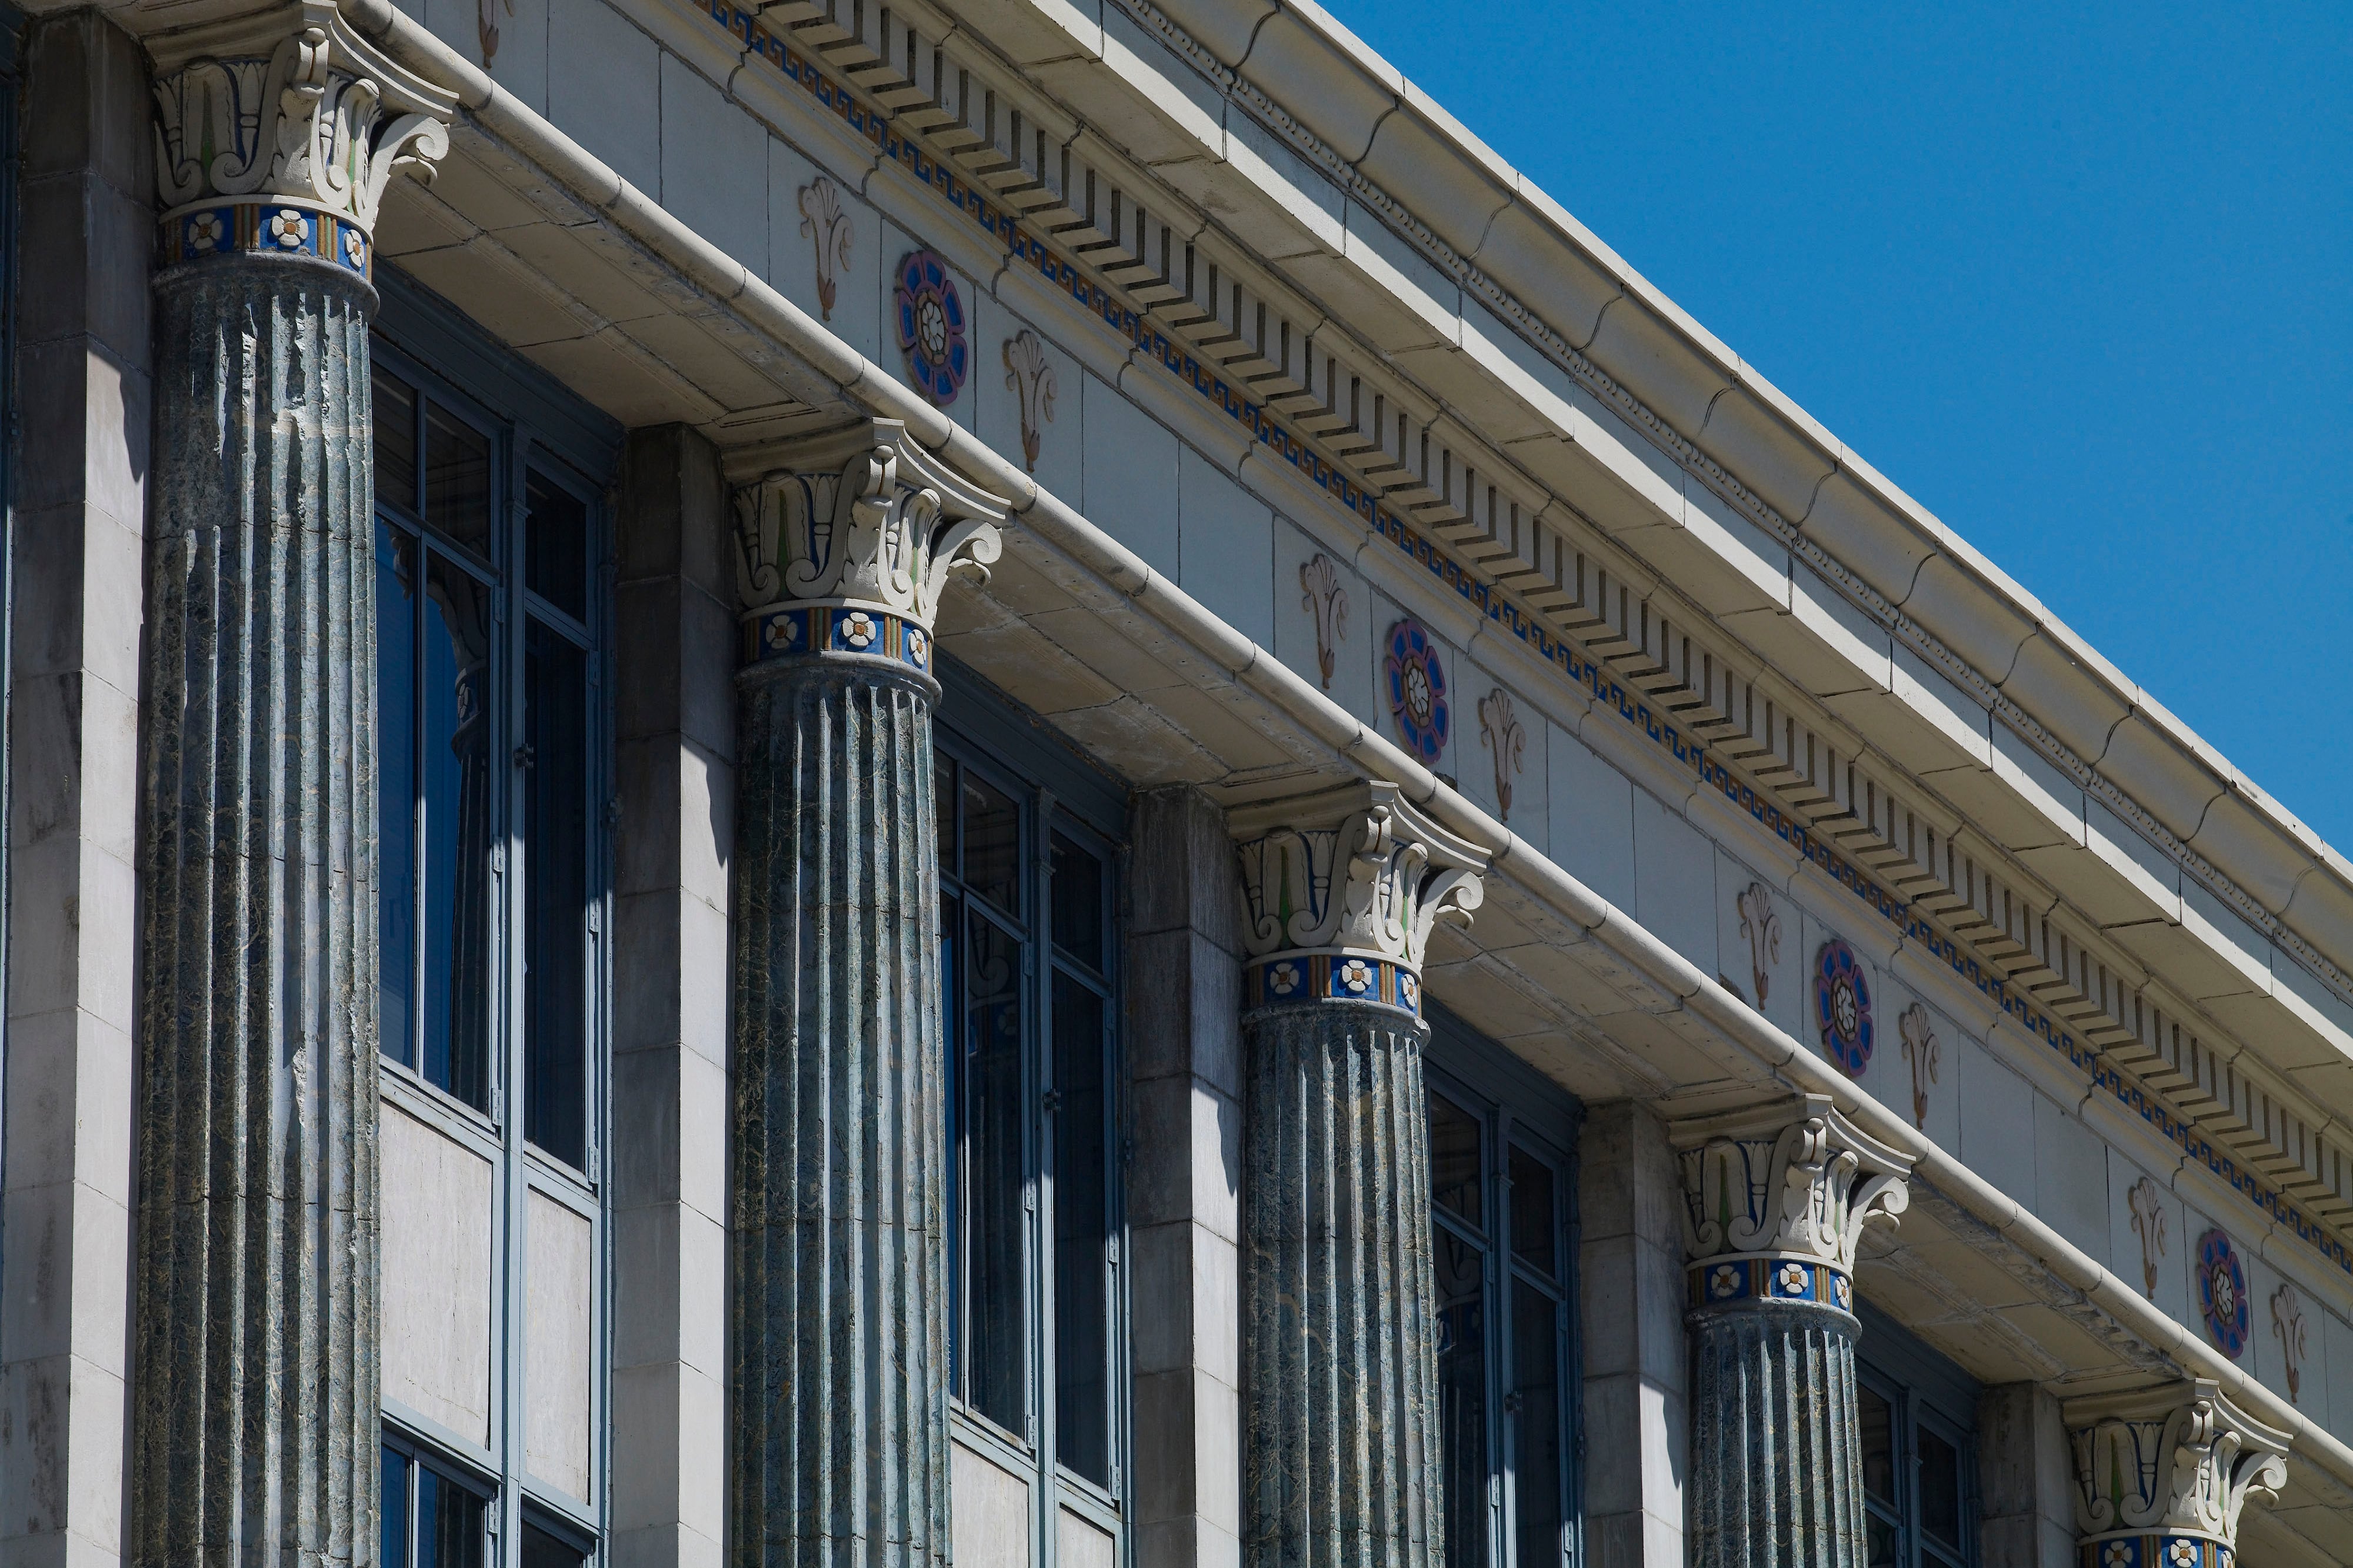 Exterior columns of the Robert J. Nealon Federal Building and U.S. Courthouse outside with a blue sky in the background in Scranton, Pennsylvania.